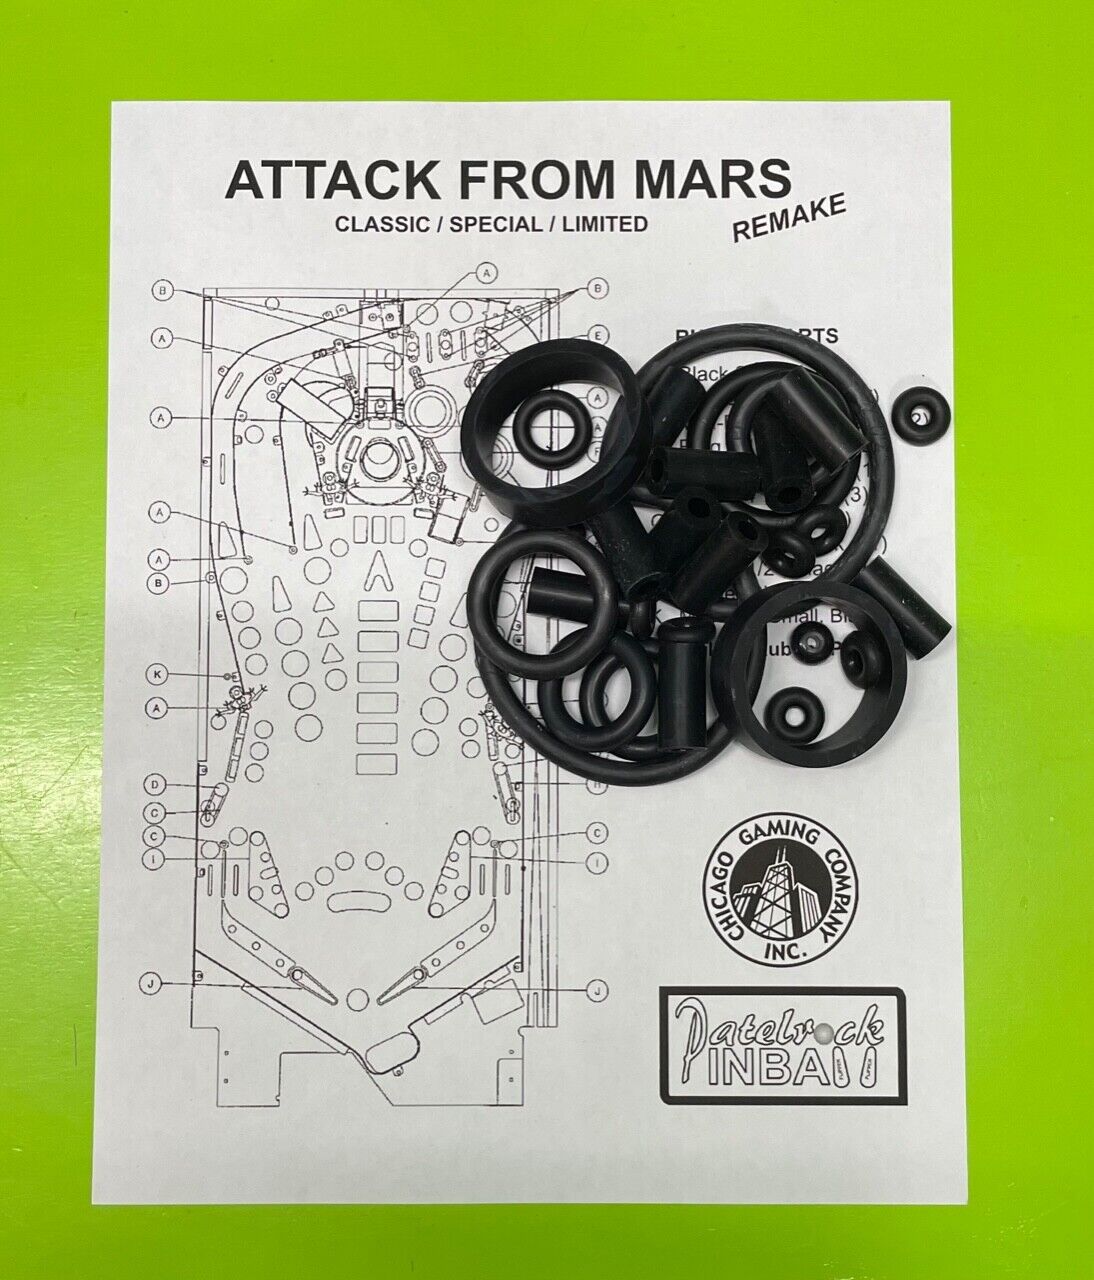 Chicago Gaming Attack From Mars pinball rubber ring kit Classic,Special, Limited